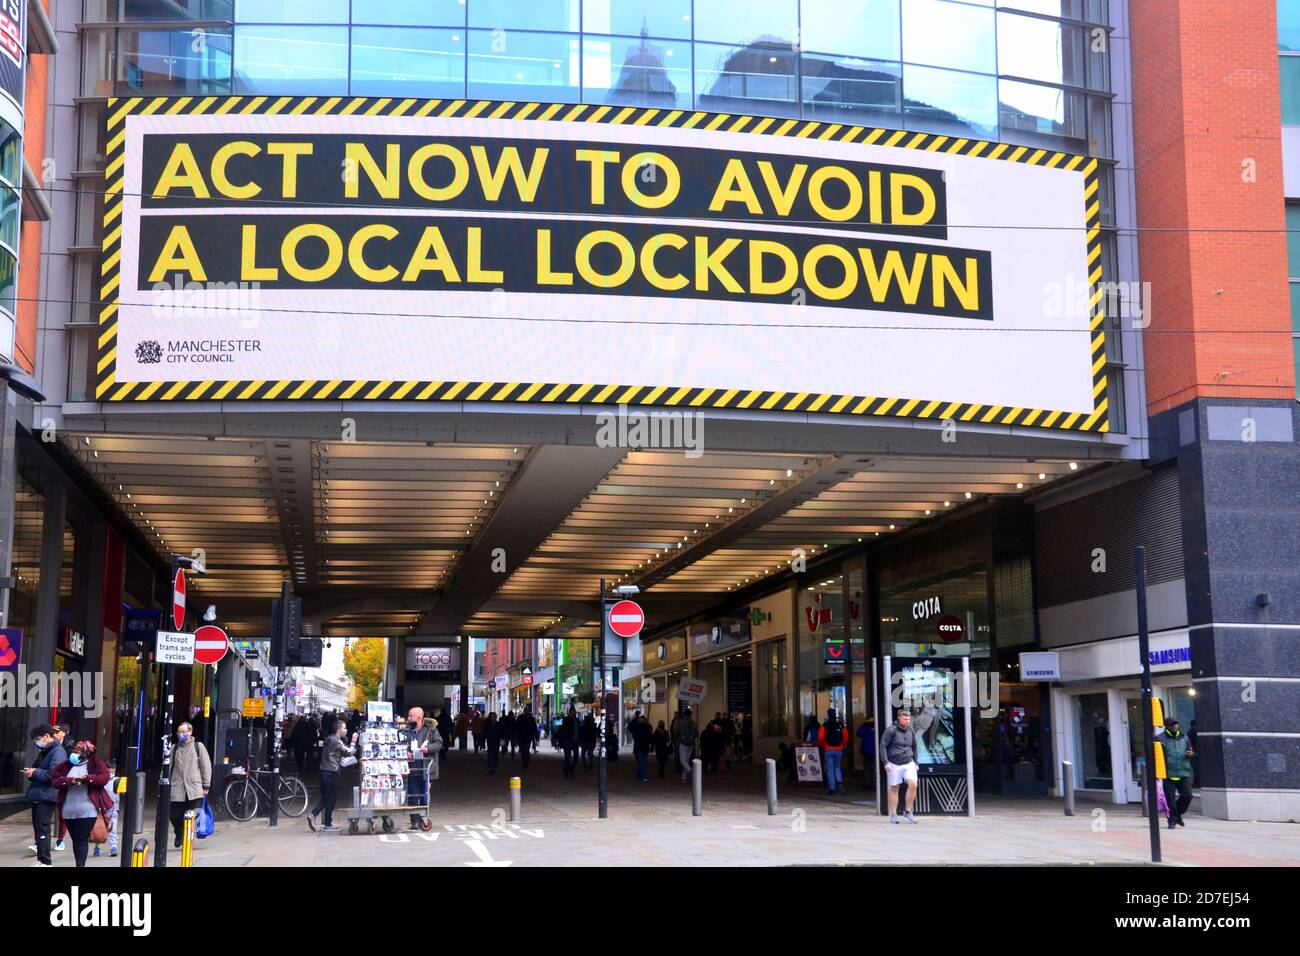 Covid 19 or coronavirus signage and advertising in Manchester, Greater Manchester, England, United Kingdom. An illuminated sign paid for by Manchester City Council on the Arndale shopping centre urges people to act now to avoid a local lockdown. Stock Photo